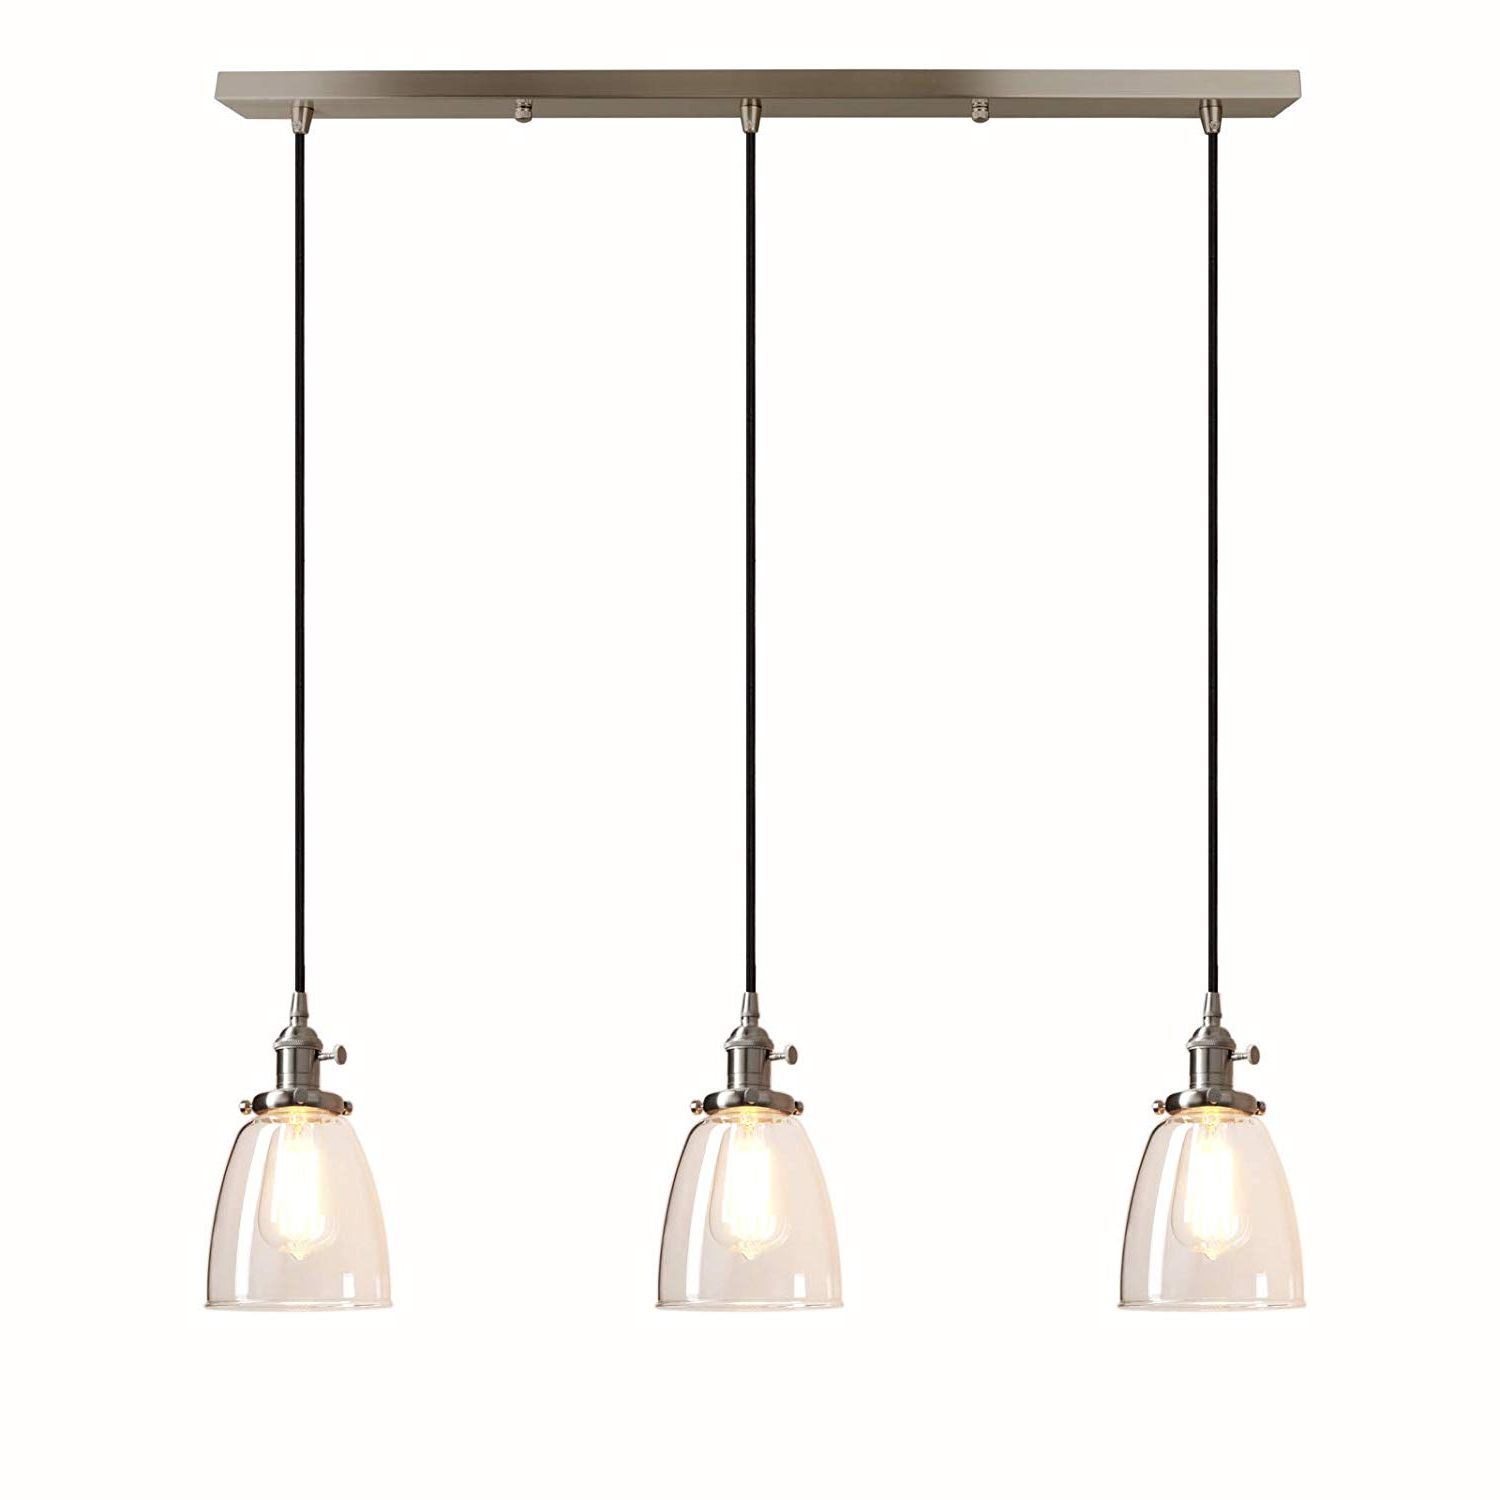 Pathson Industrial 3 Light Pendant Lighting Kitchen Island Hanging Lamps  With Oval Clear Glass Shade Chandelier Ceiling Light Fixture (brushed Steel) Pertaining To Preferred Bautista 6 Light Kitchen Island Bulb Pendants (Photo 13 of 25)